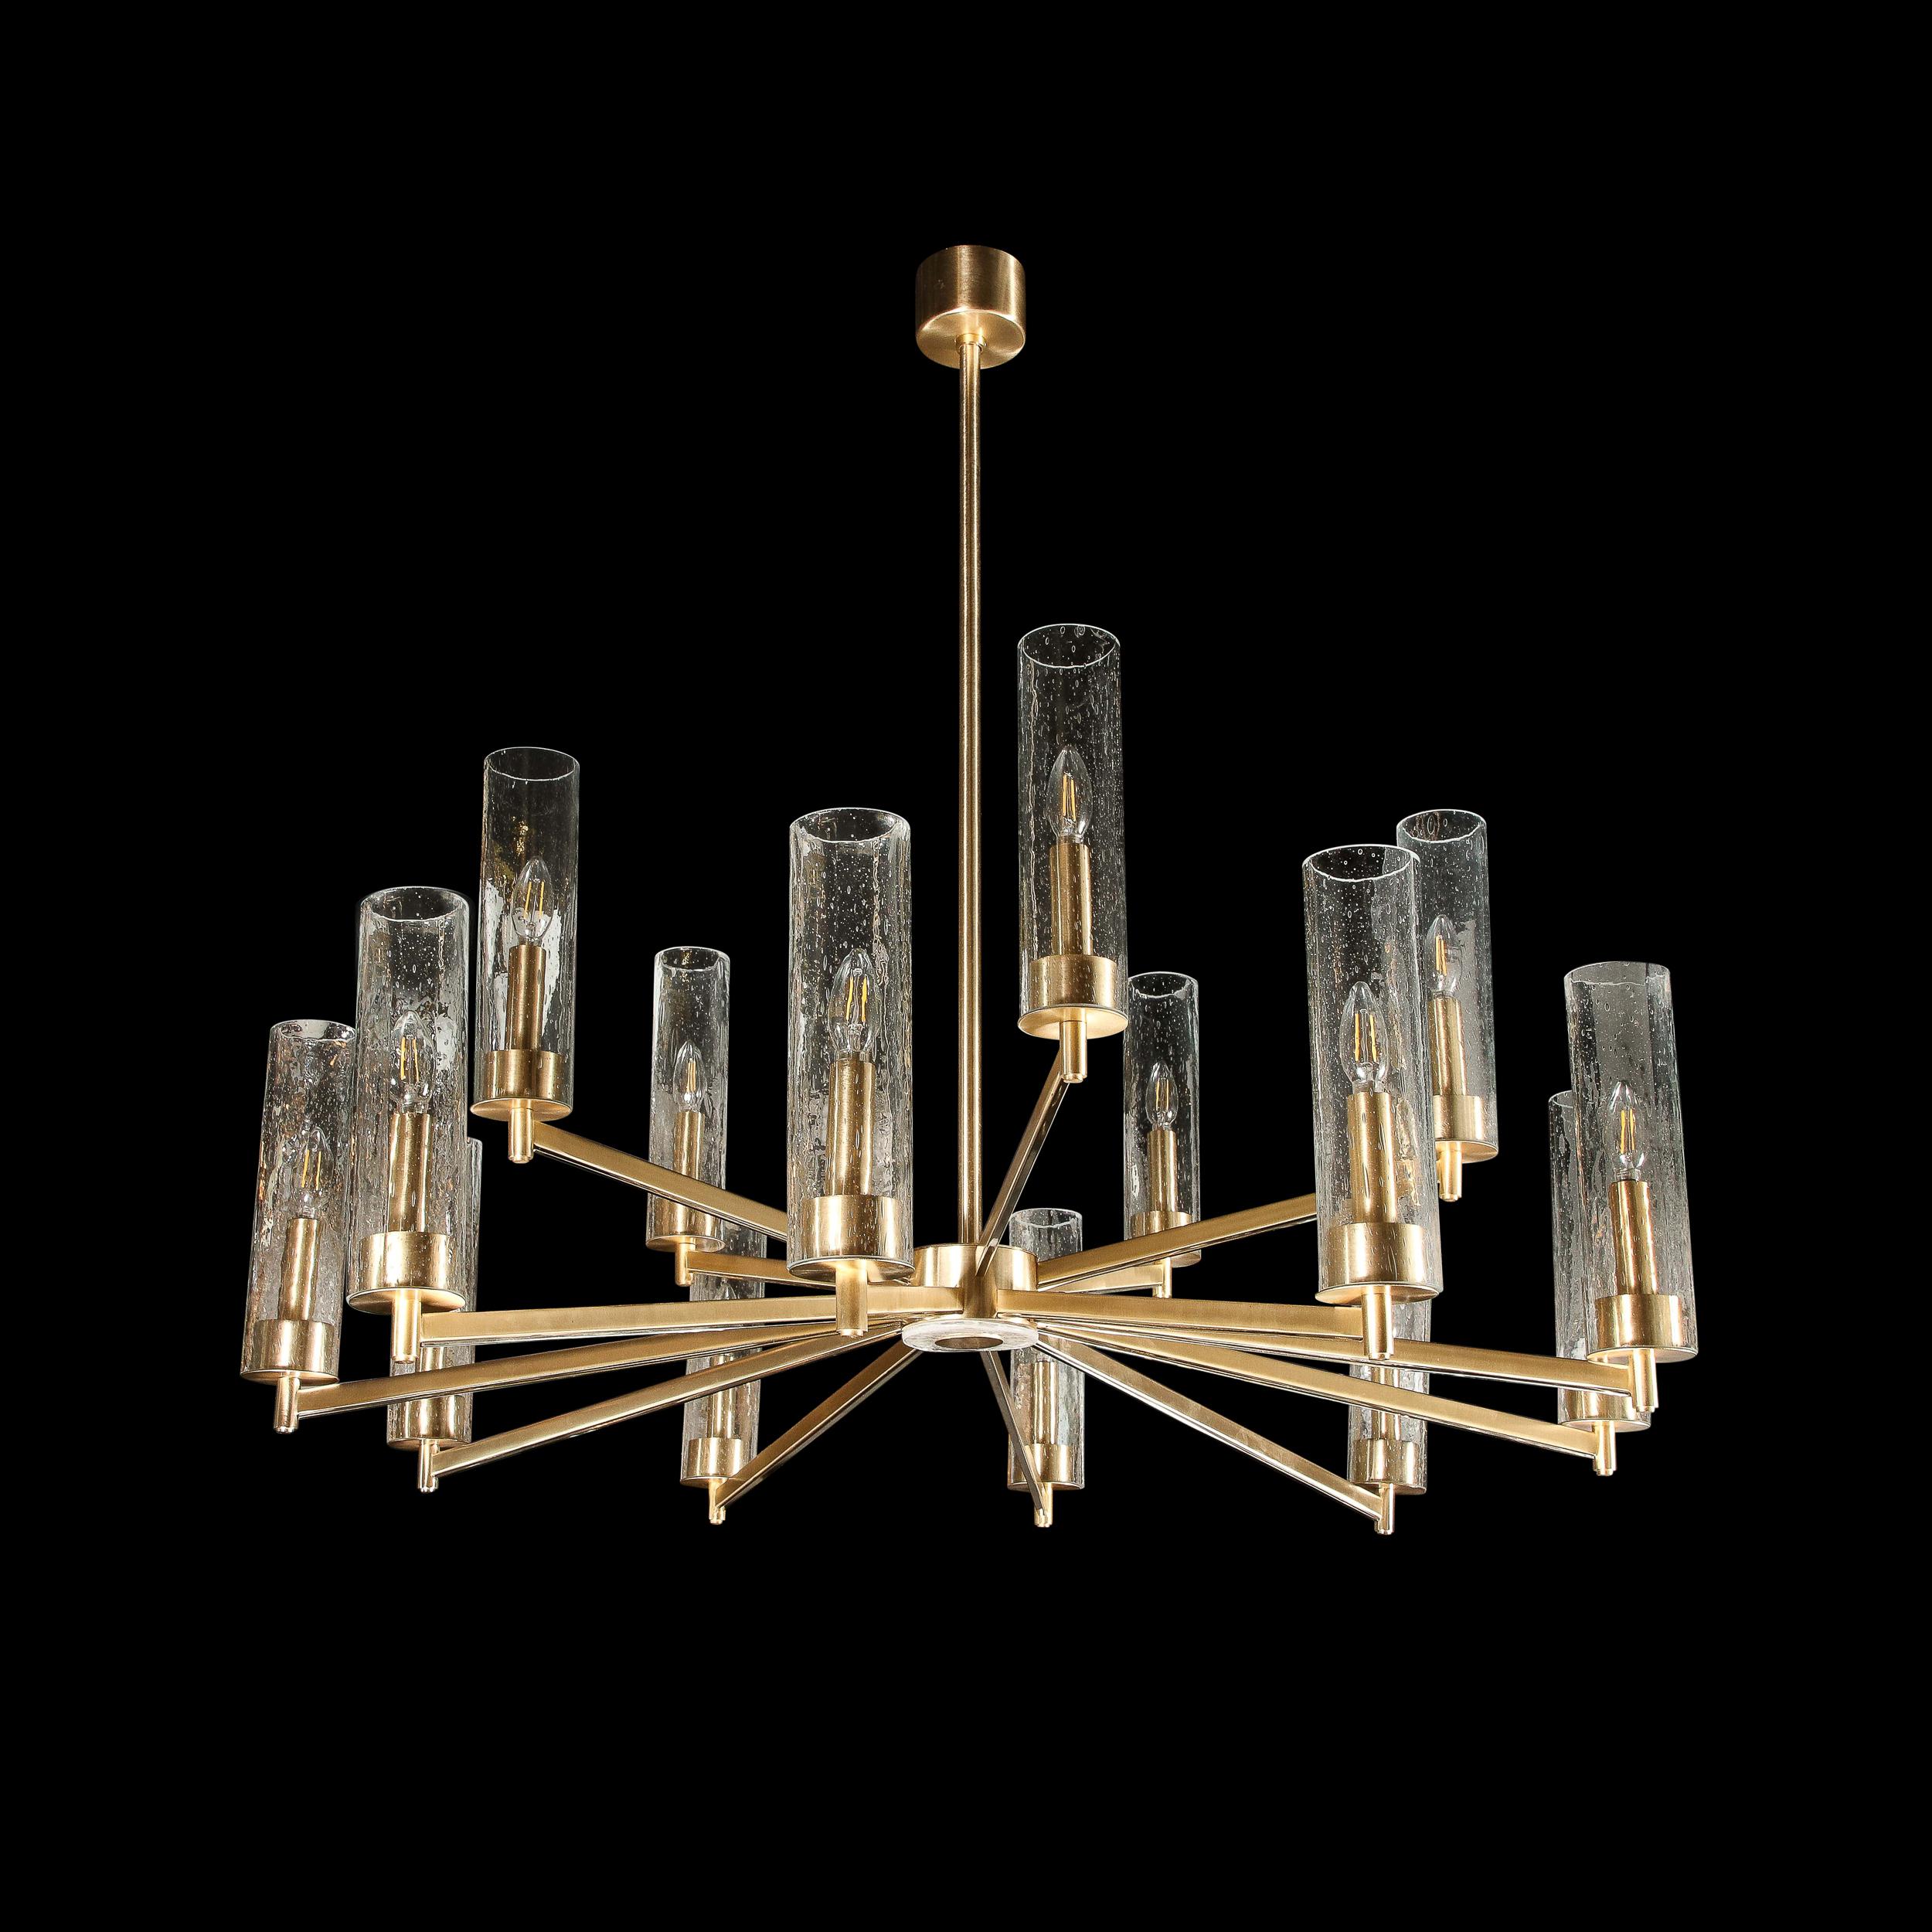 This stunning and graphic modernist chandelier was realized in Italy during the latter half of the 20th century. It features 15 rectilinear arms in brushed brass extending from a volumetric circular body with a brass center surrounded by textural